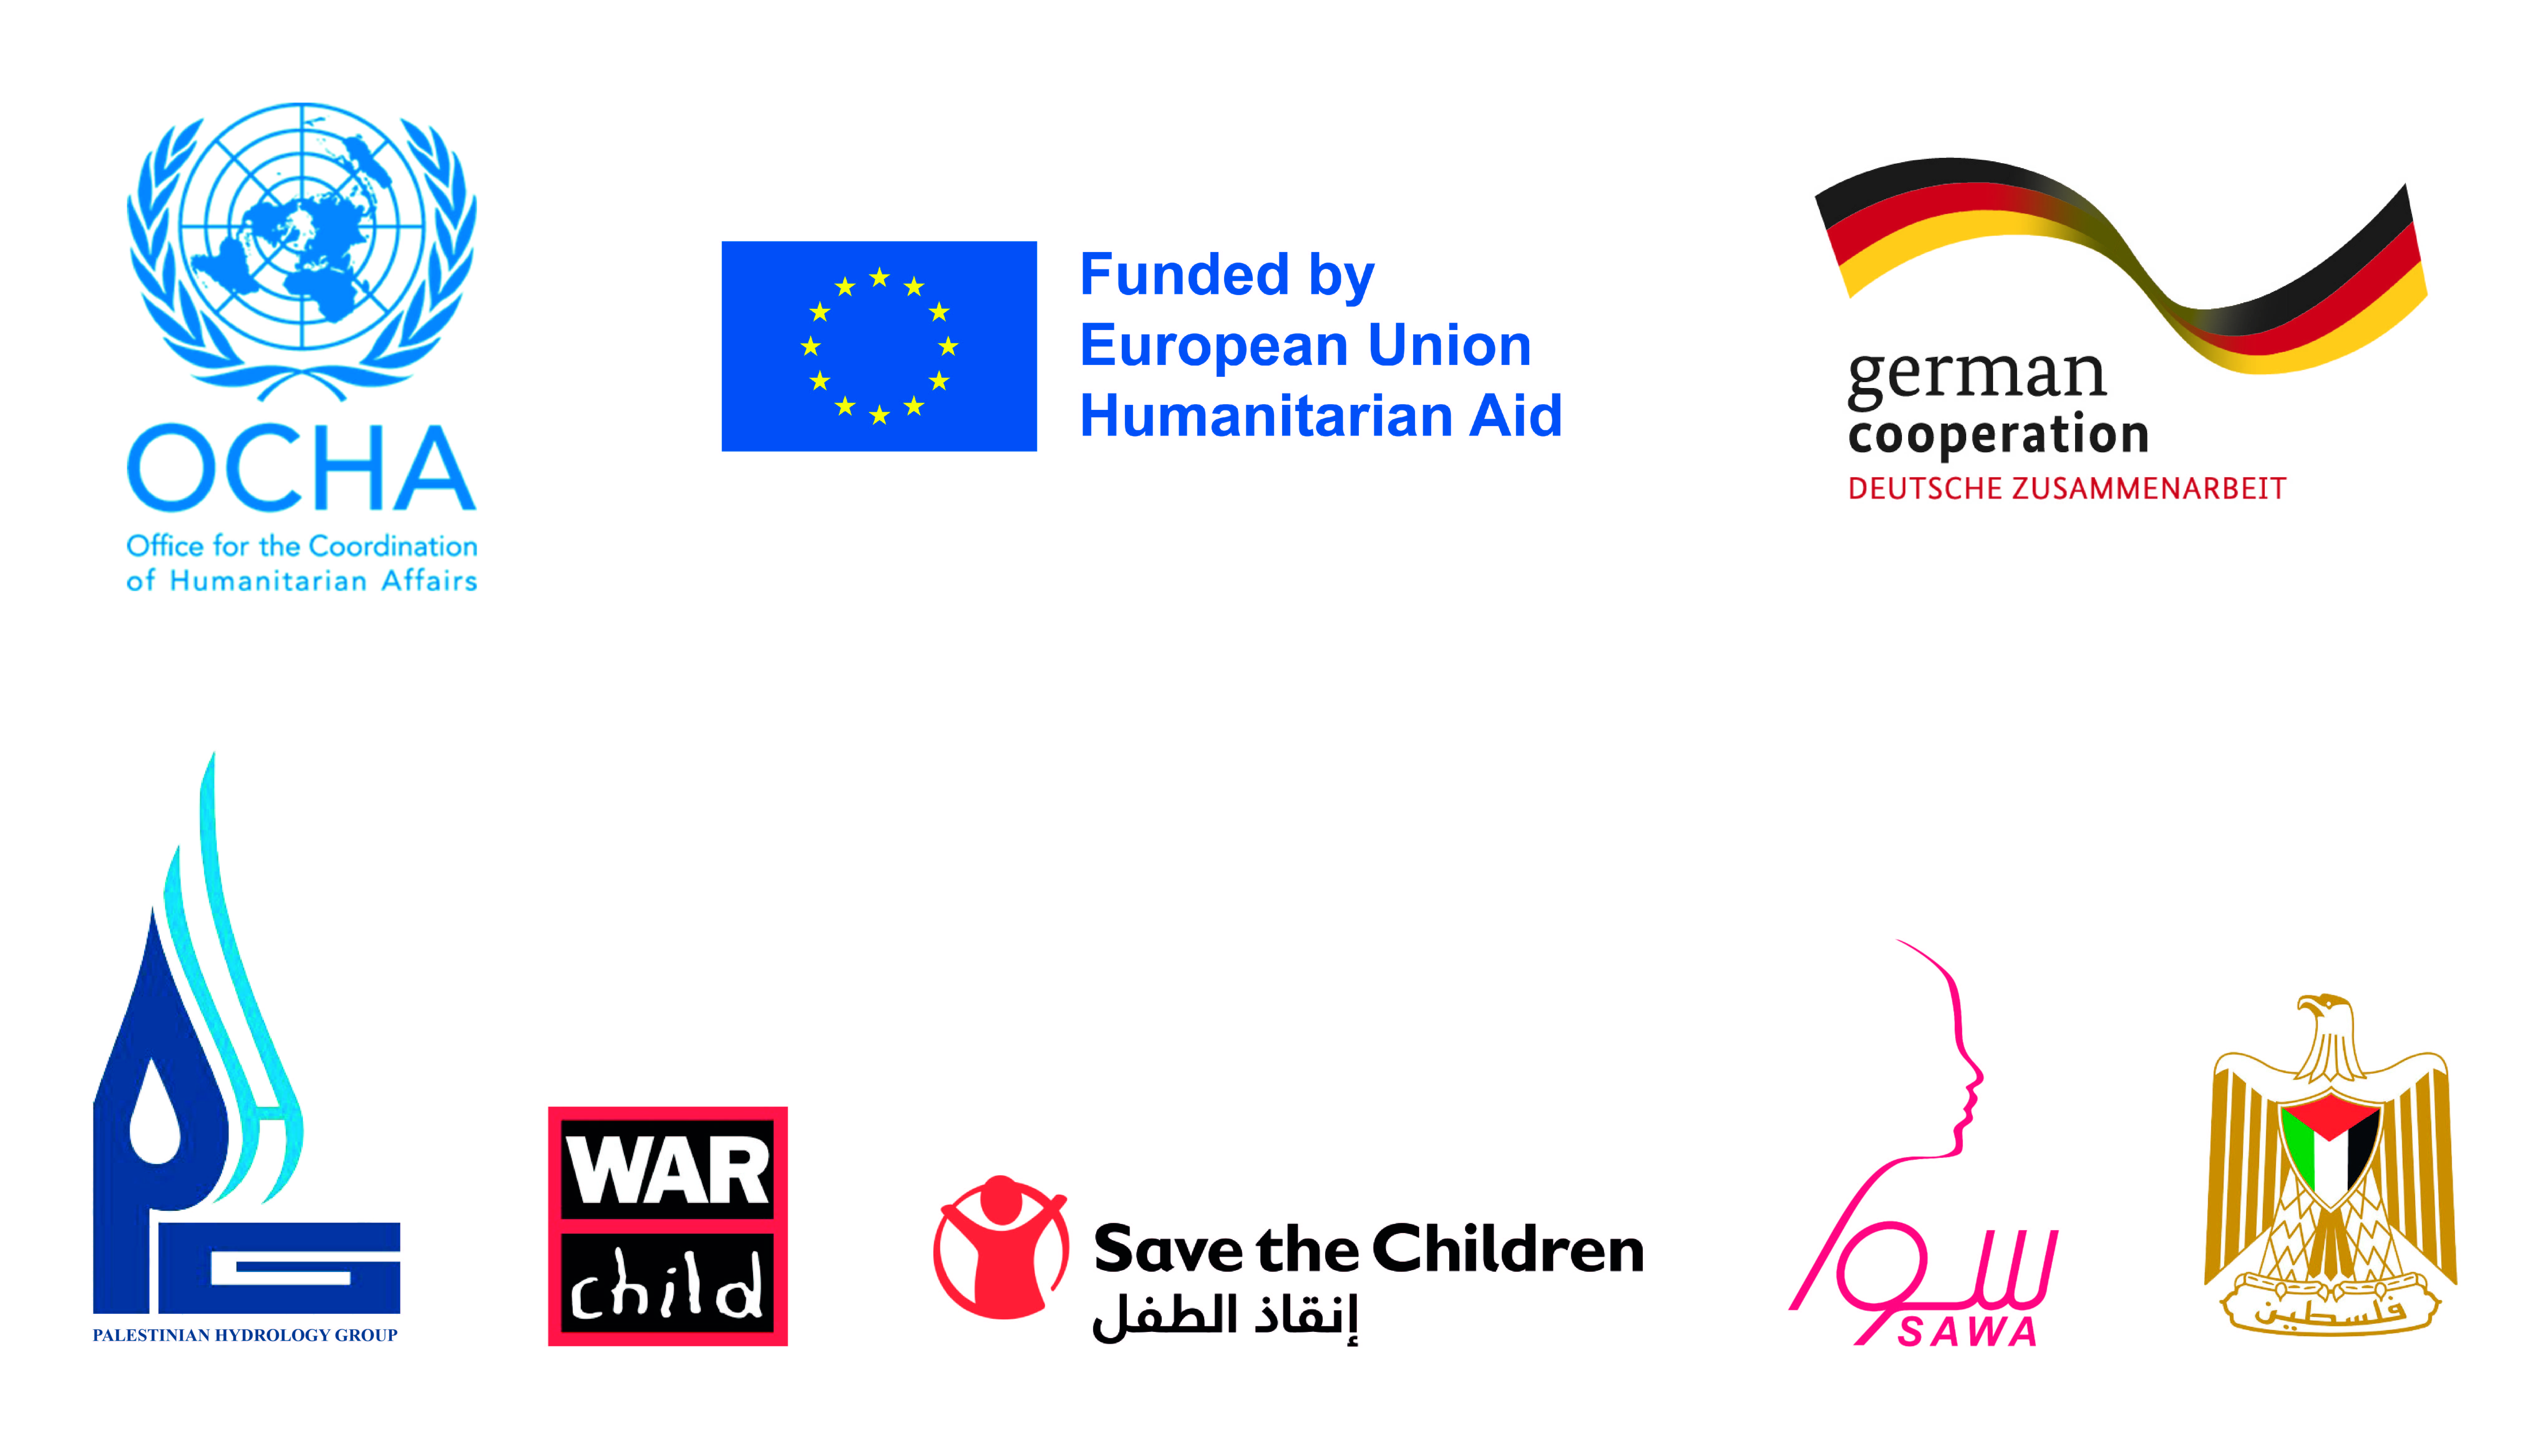 Meet our Partners and Donors